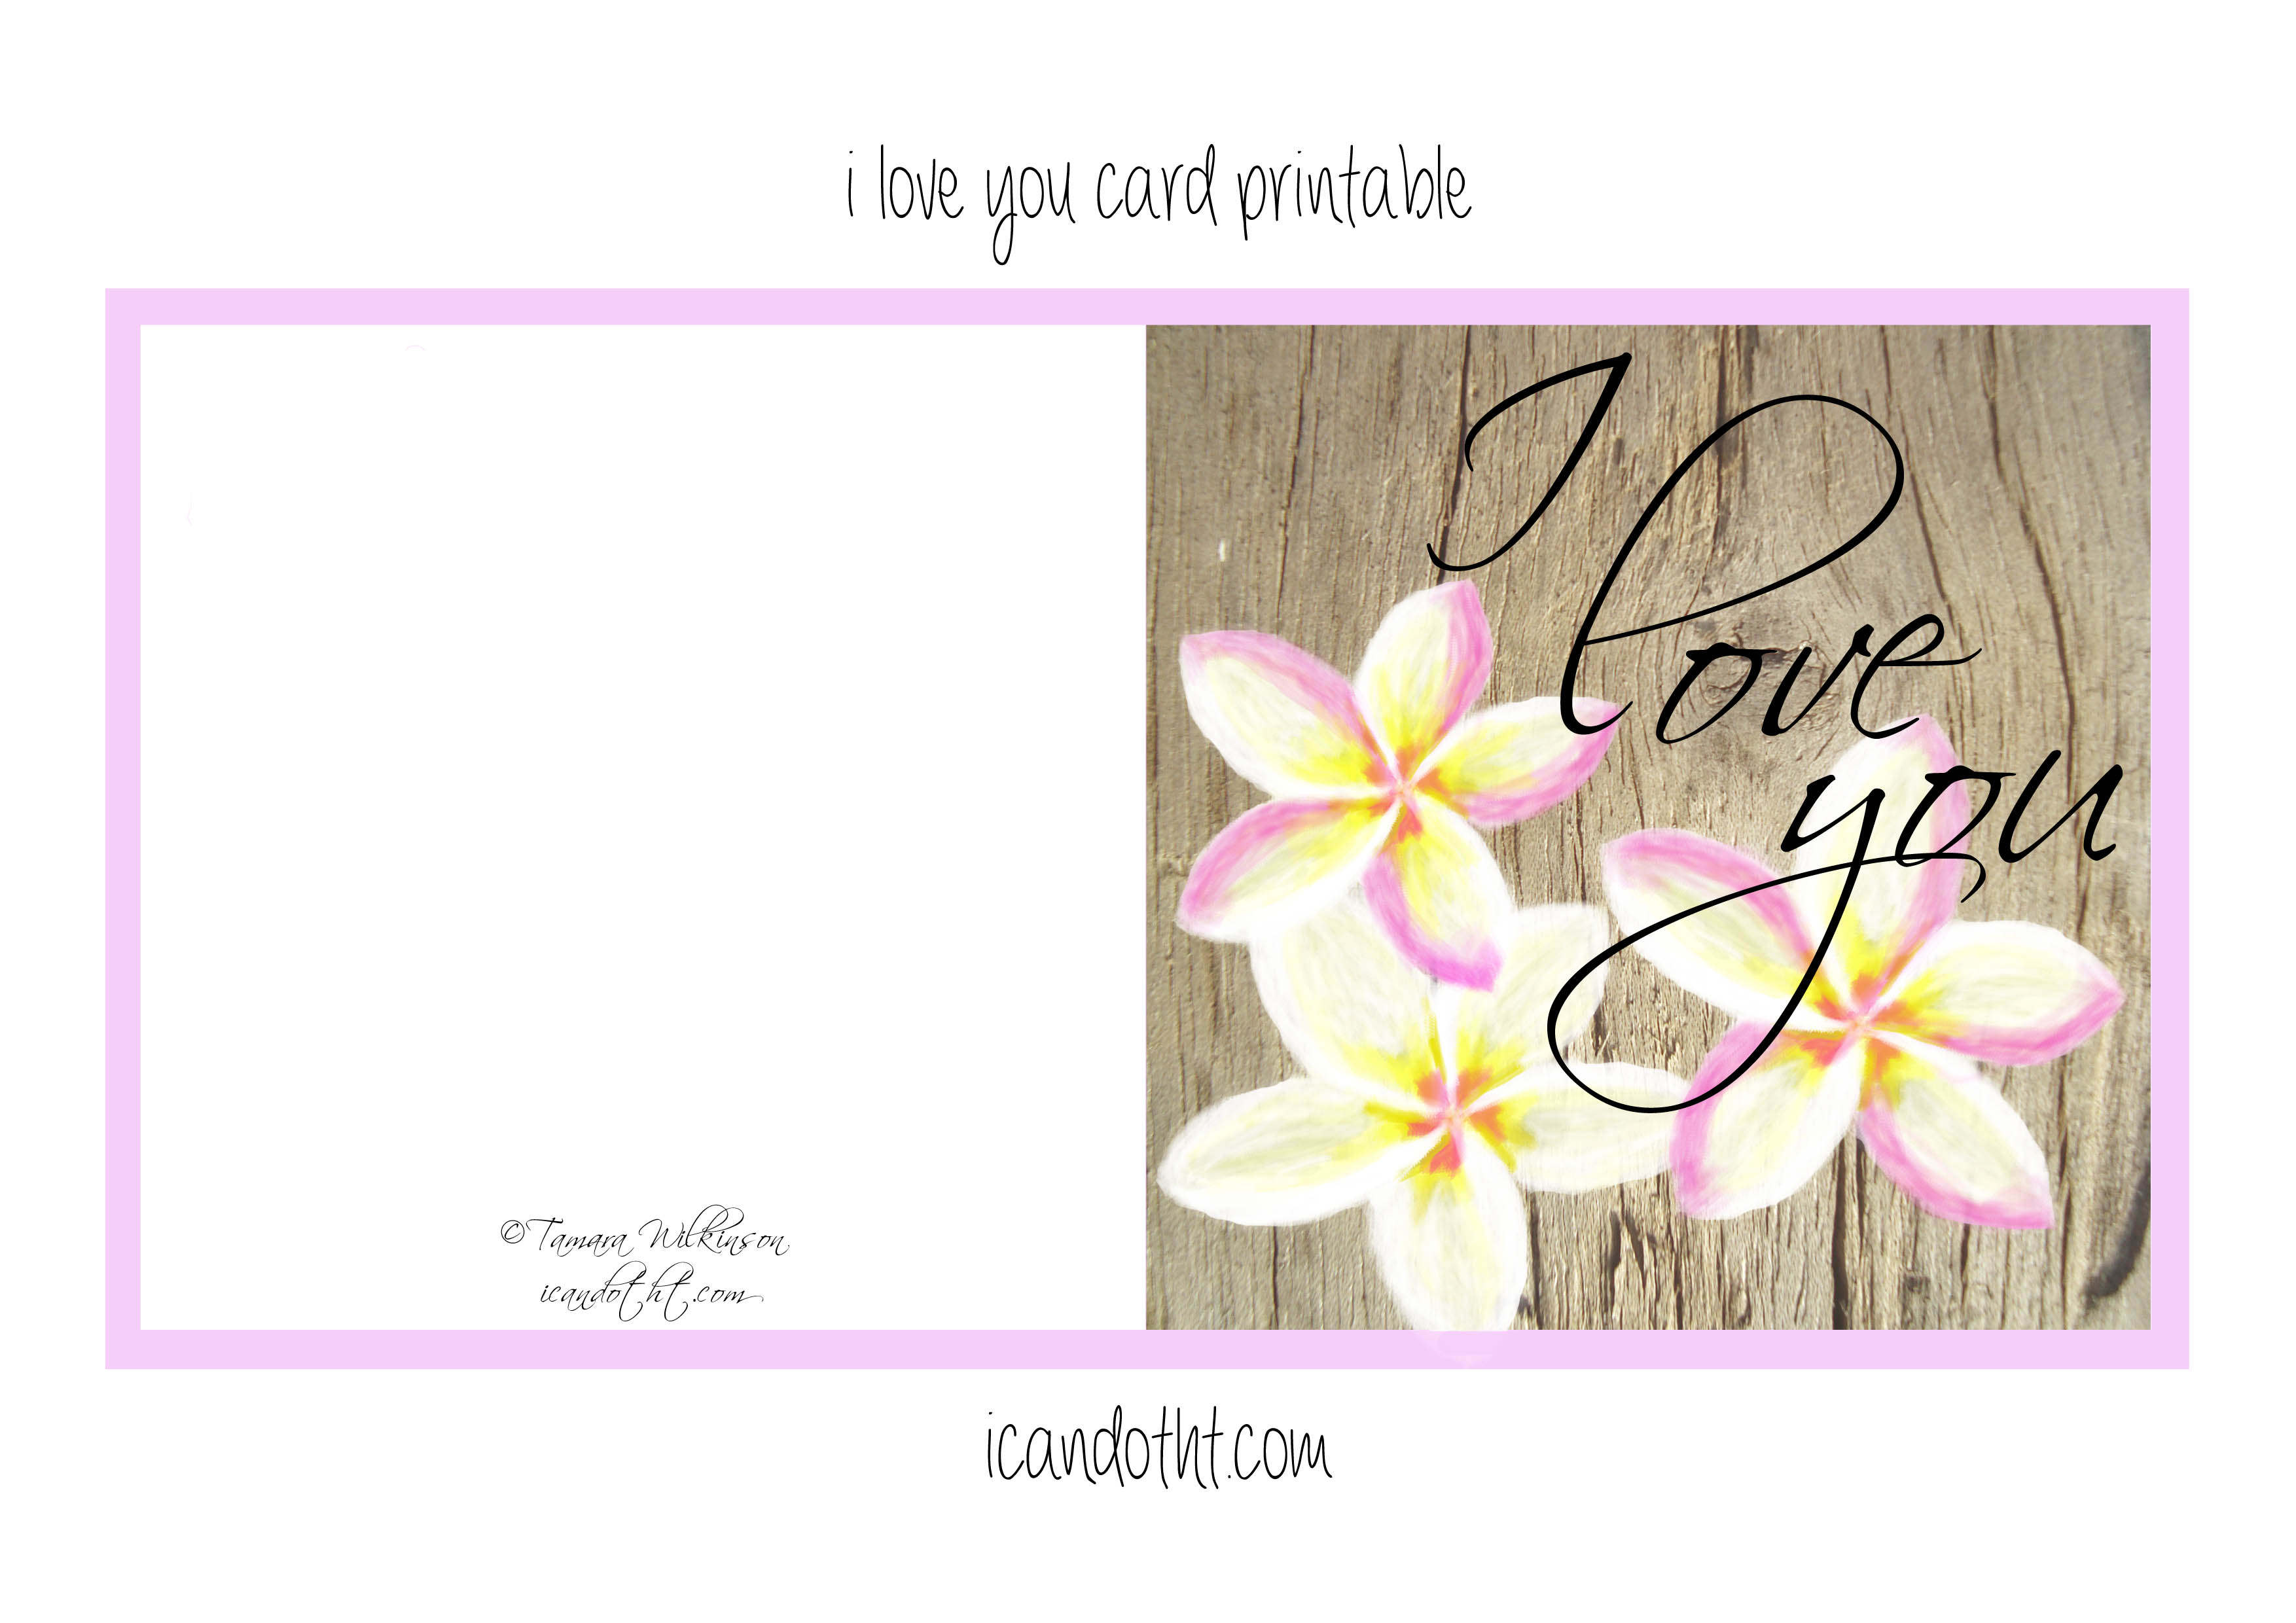 6 Best Images of Love You Card Printable Free Free Printable Love